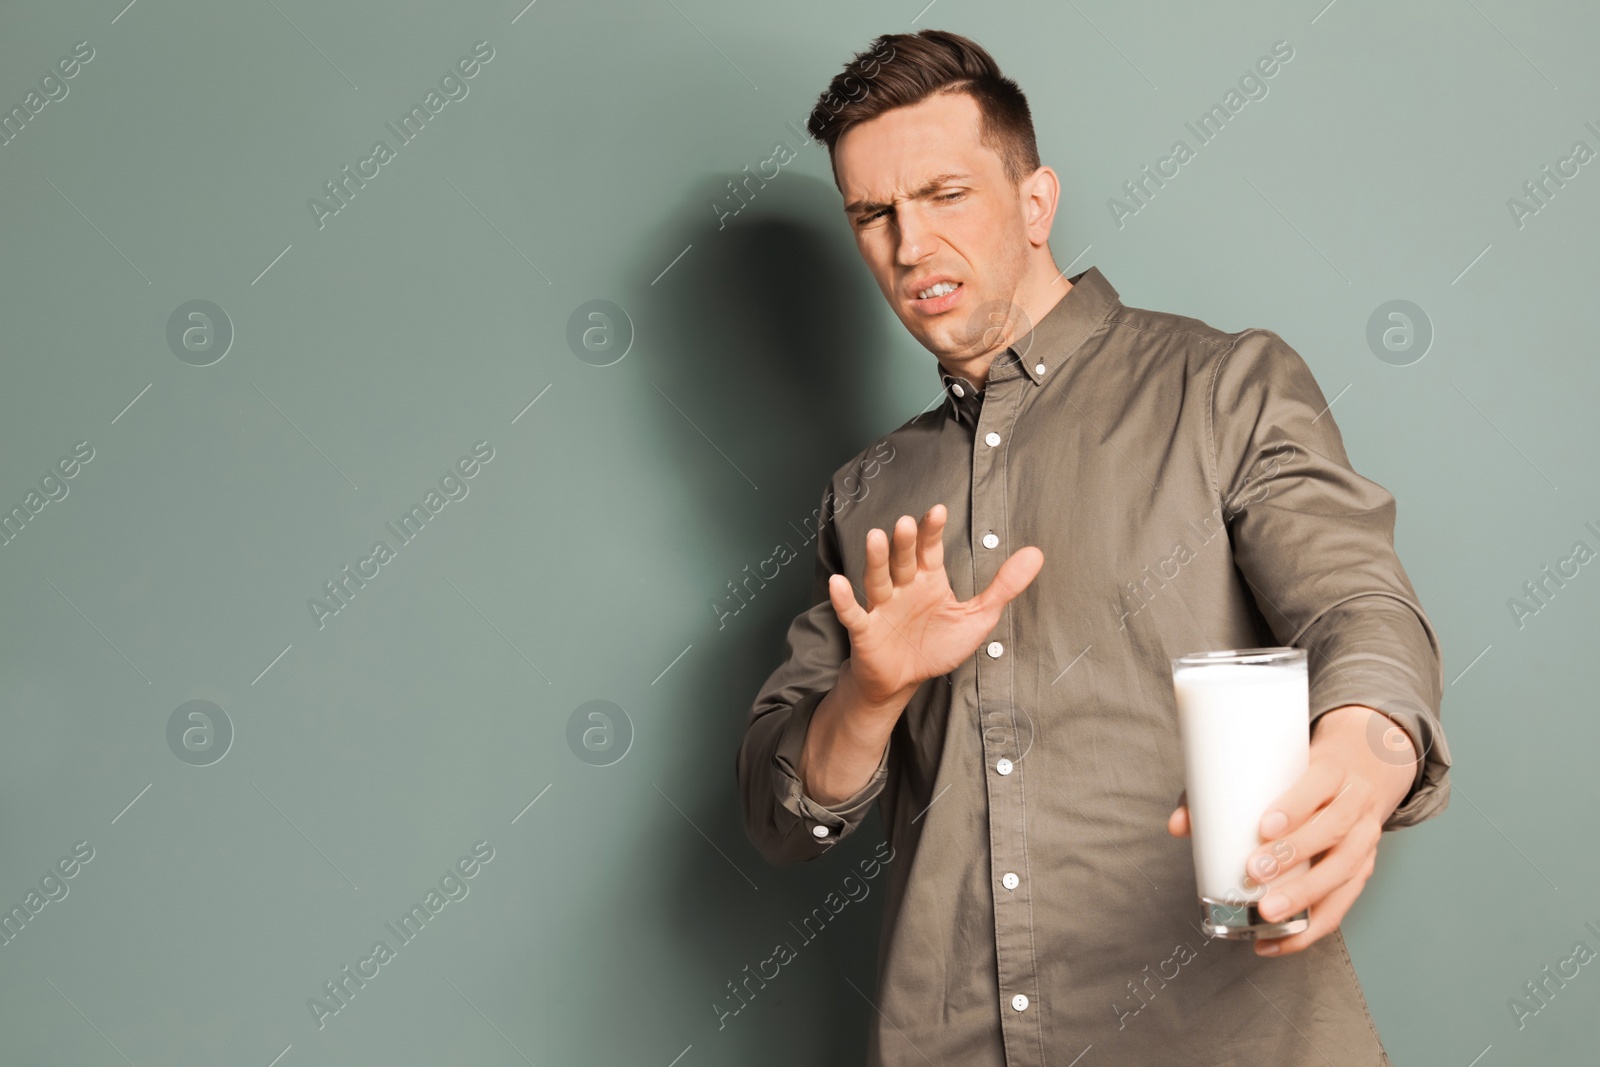 Photo of Young man with dairy allergy holding glass of milk on color background